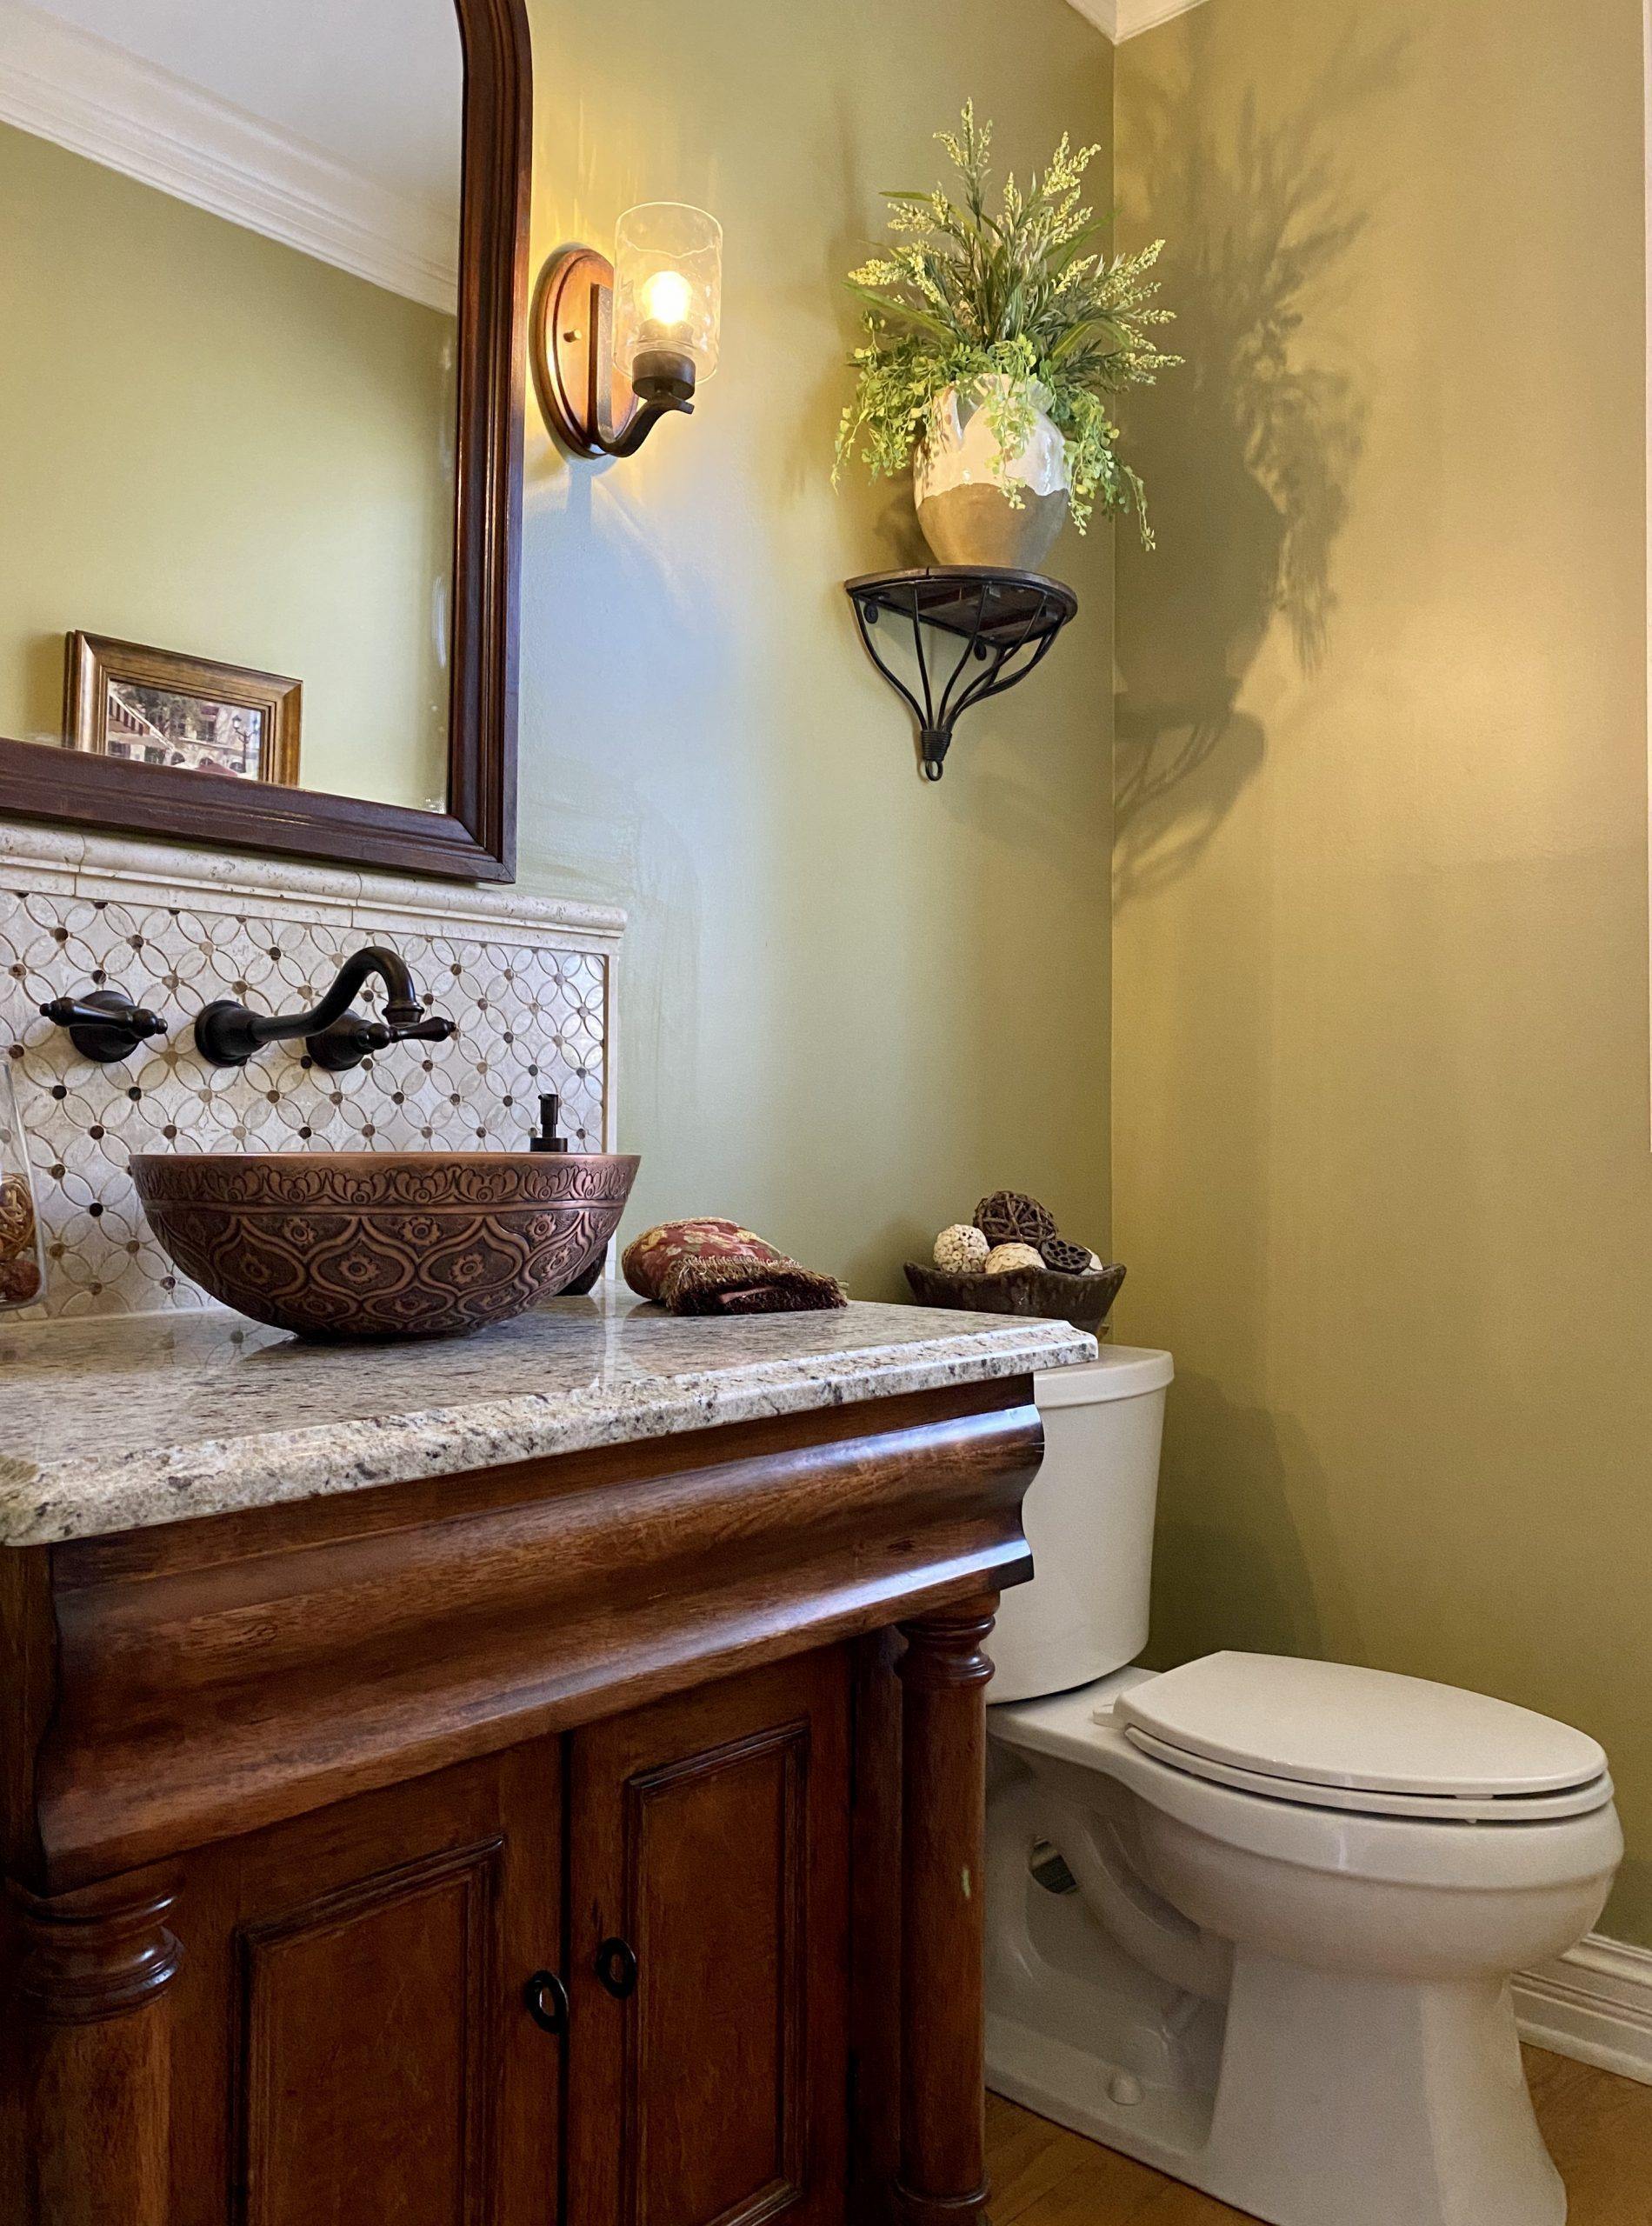 Bathroom Remodel: A Little Old Mixed with a Little New - Signastyle Boutique